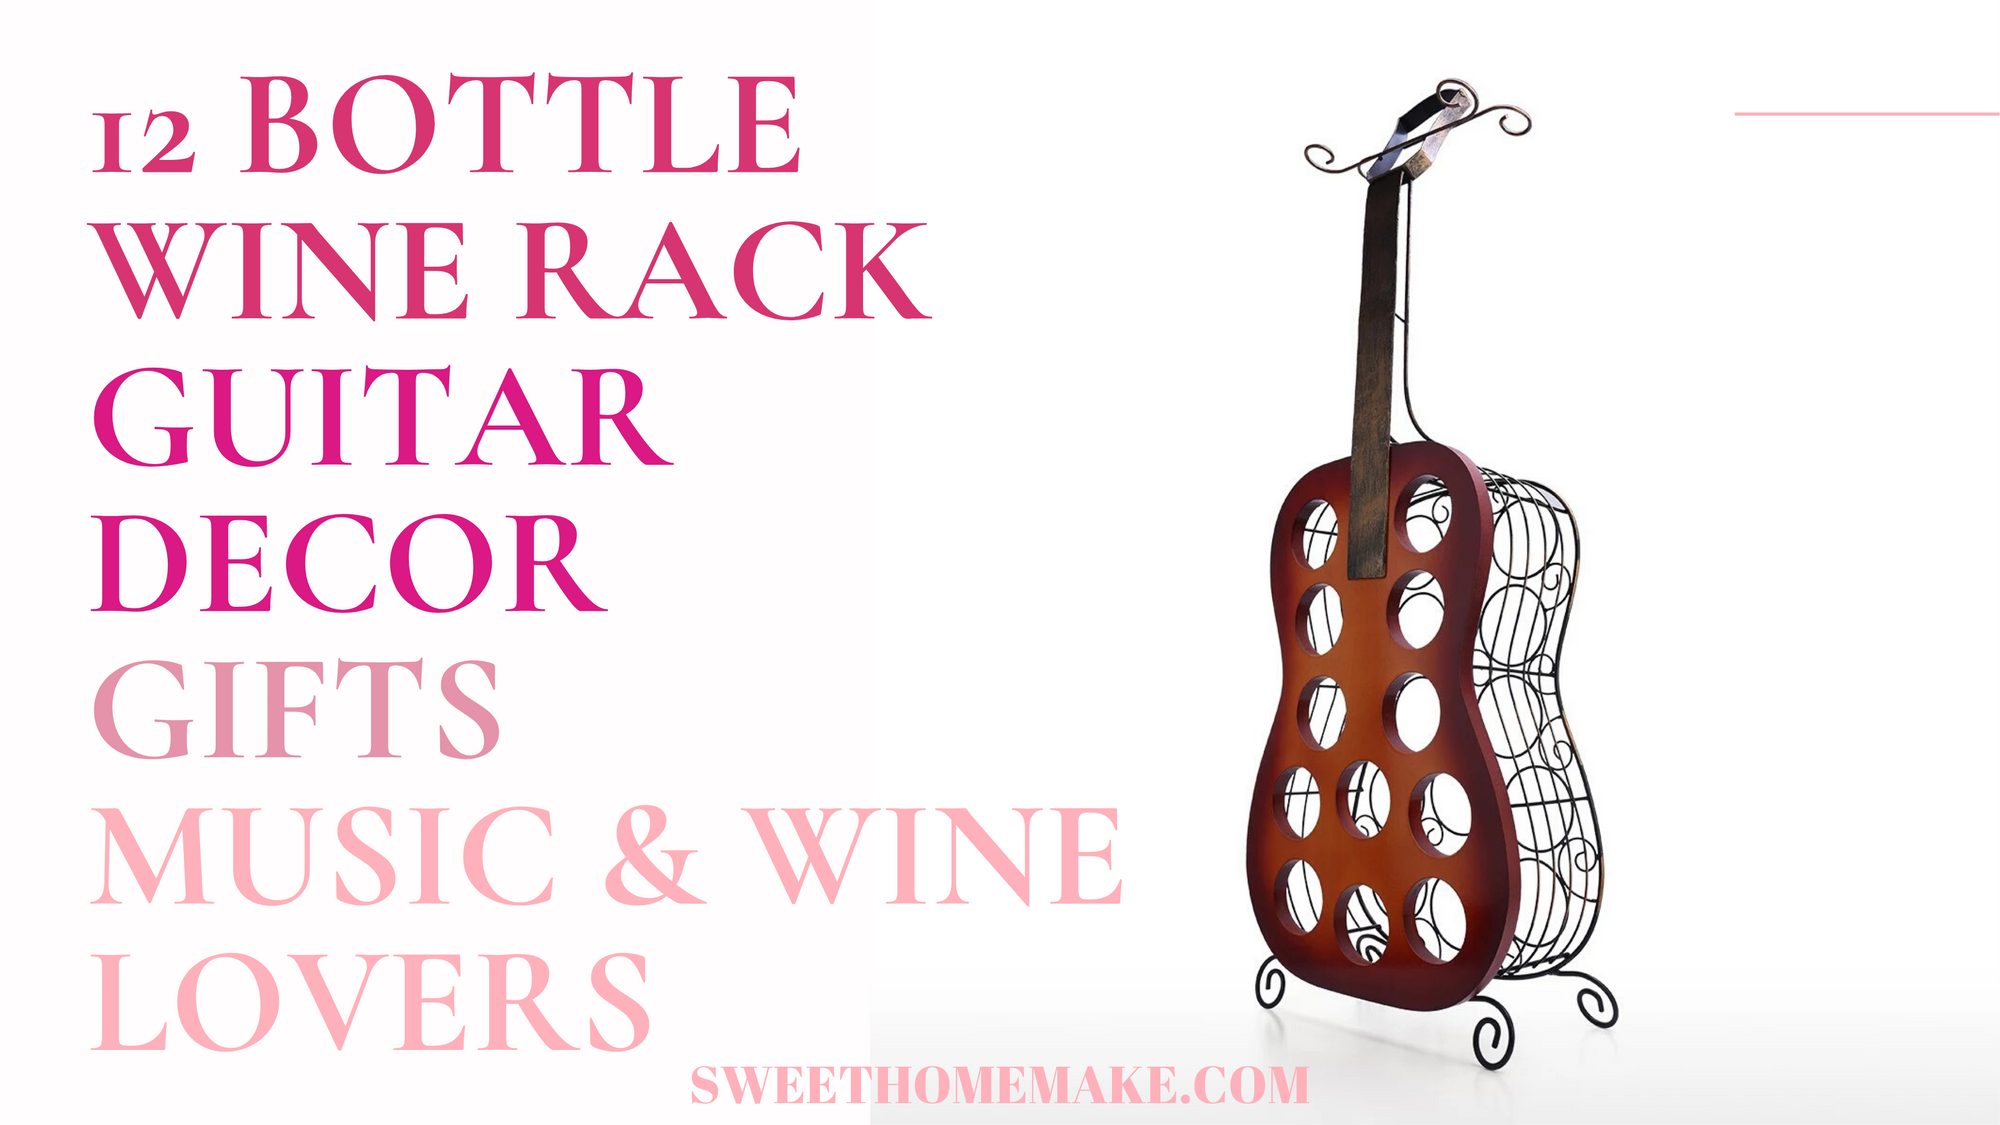 12 Bottle Wine Rack Holder by Guitar Decor Gifts for Music Lovers and Gifts for Wine Lovers